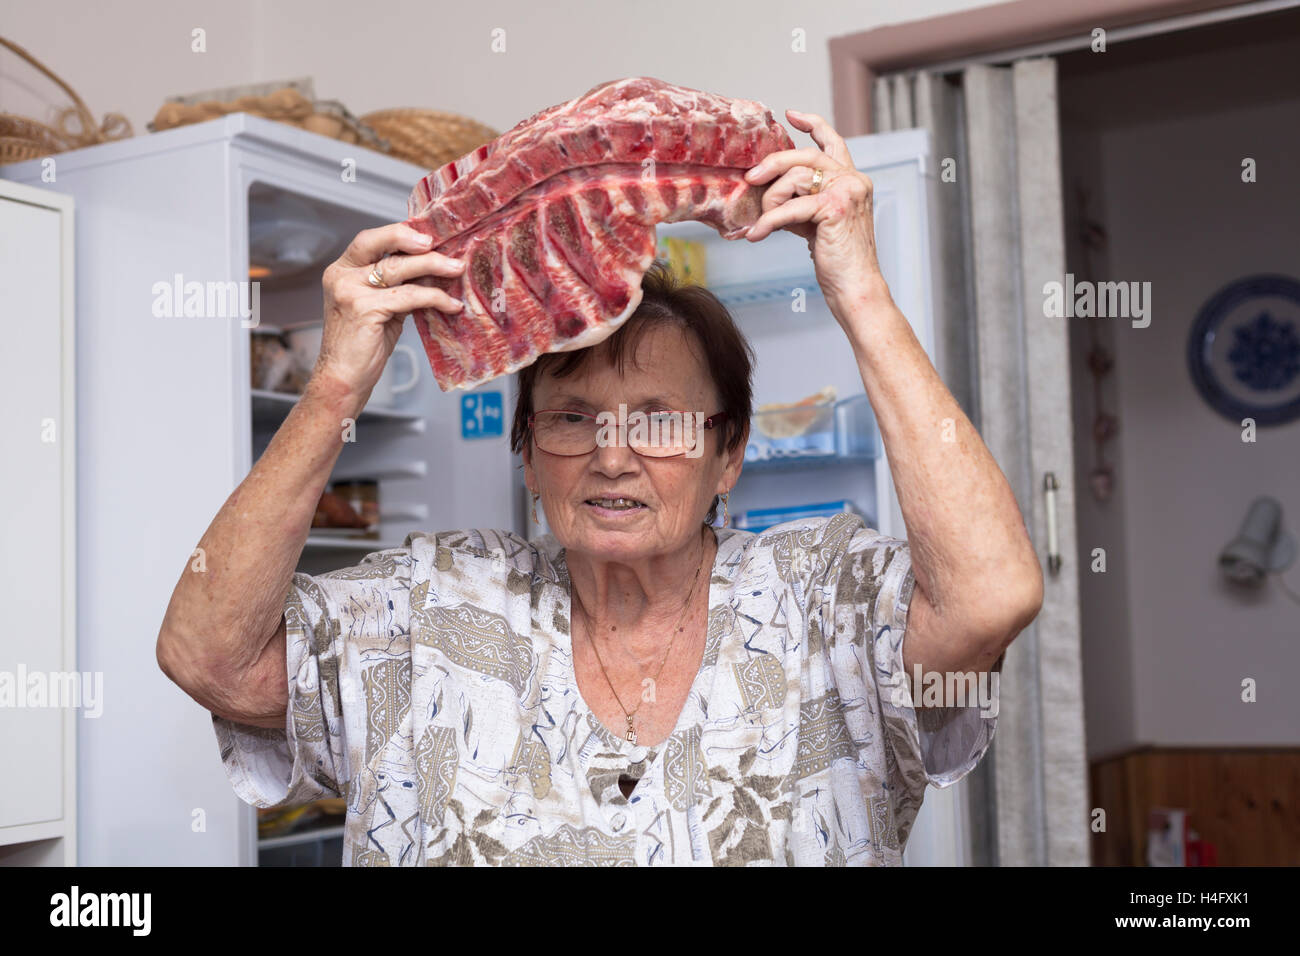 Senior woman holding raw pork ribs while standing in front of the open fridge in the kitchen. Stock Photo